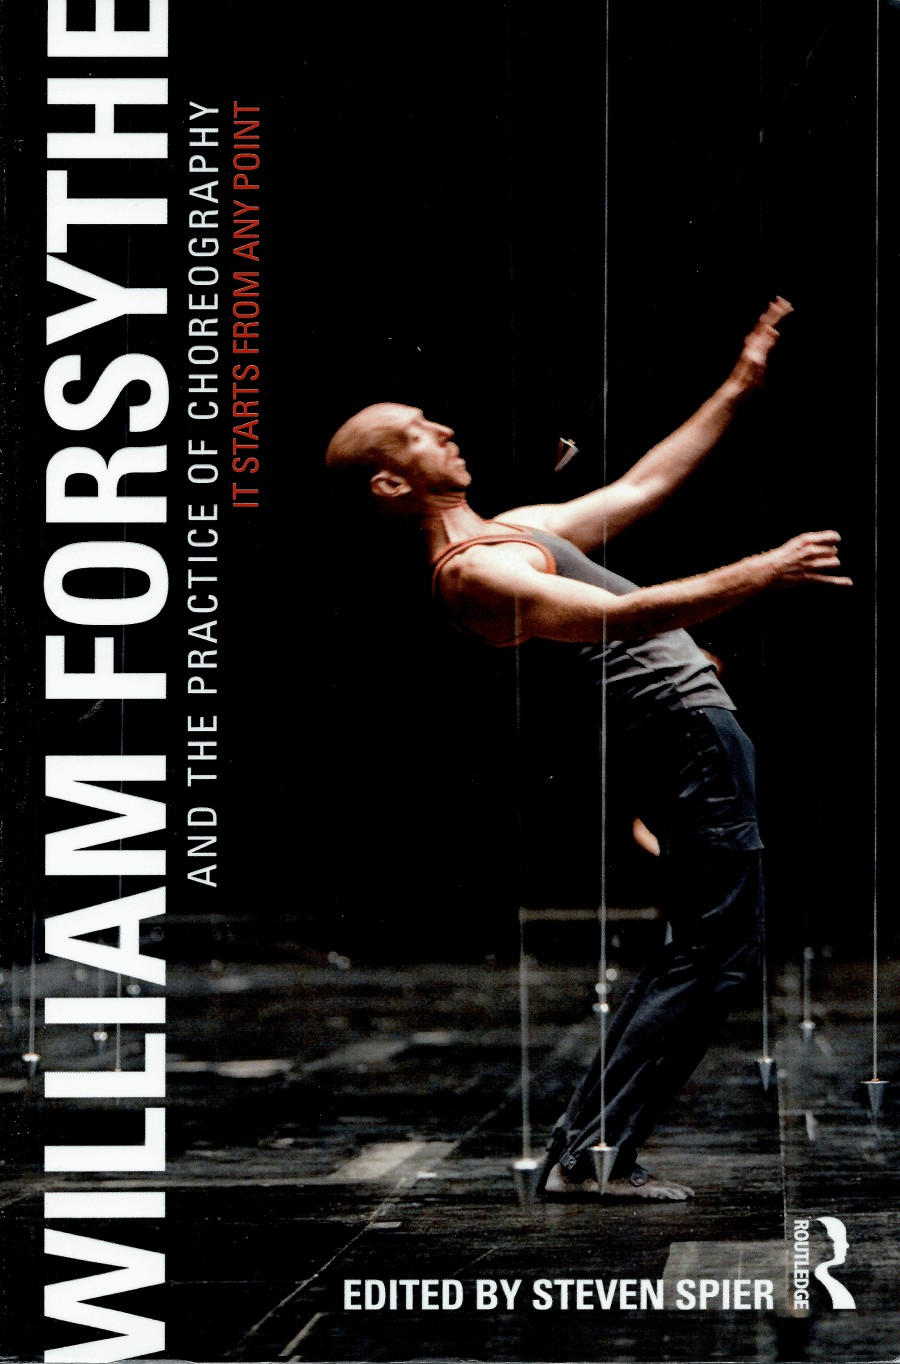 William Forsythe and the Practice of Choreography - It Starts from Any Point